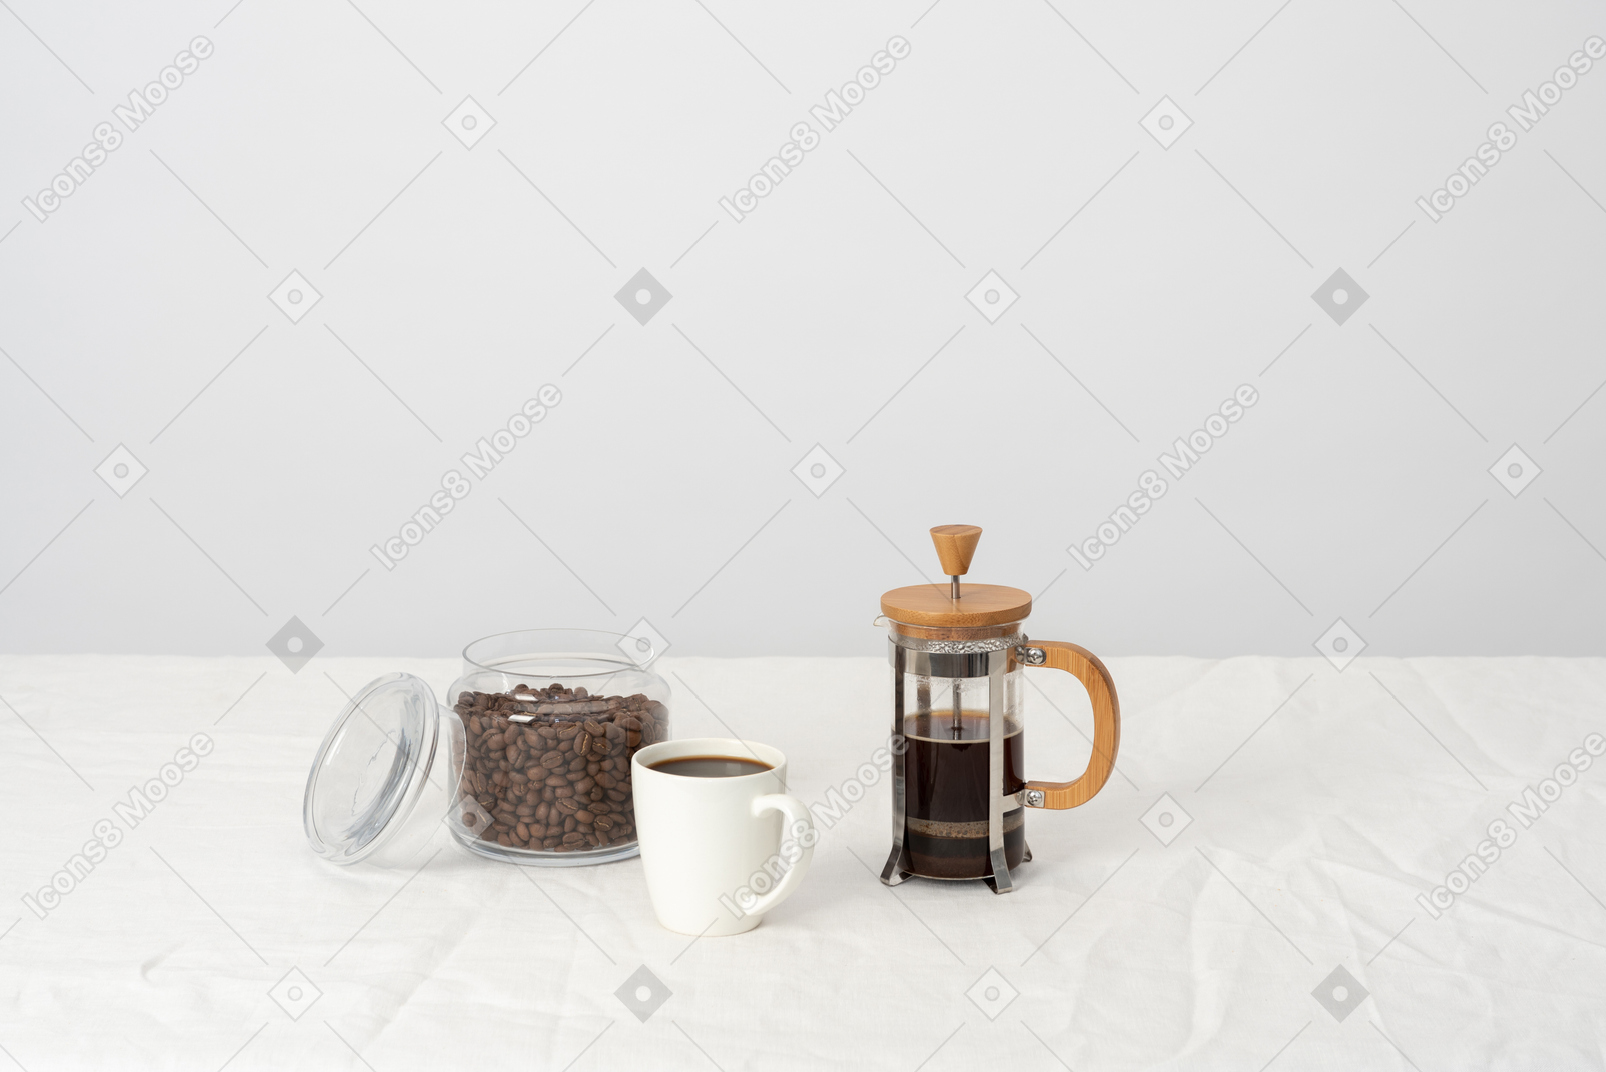 Coffee in french press, large cup of black coffee and jar with coffee beans